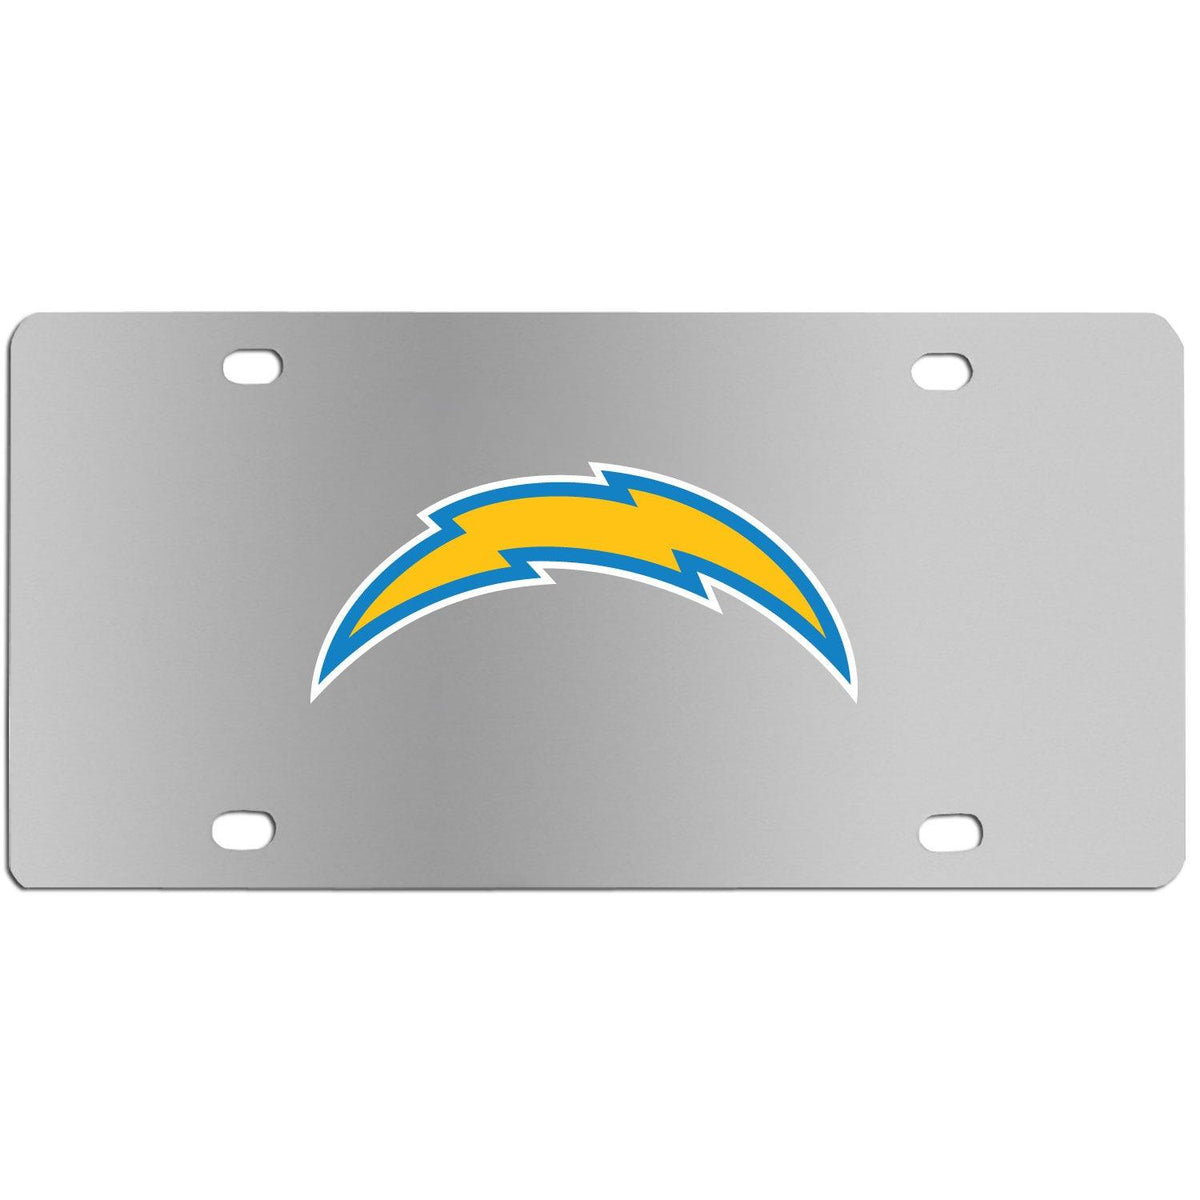 Los Angeles Chargers Steel License Plate Wall Plaque - Flyclothing LLC